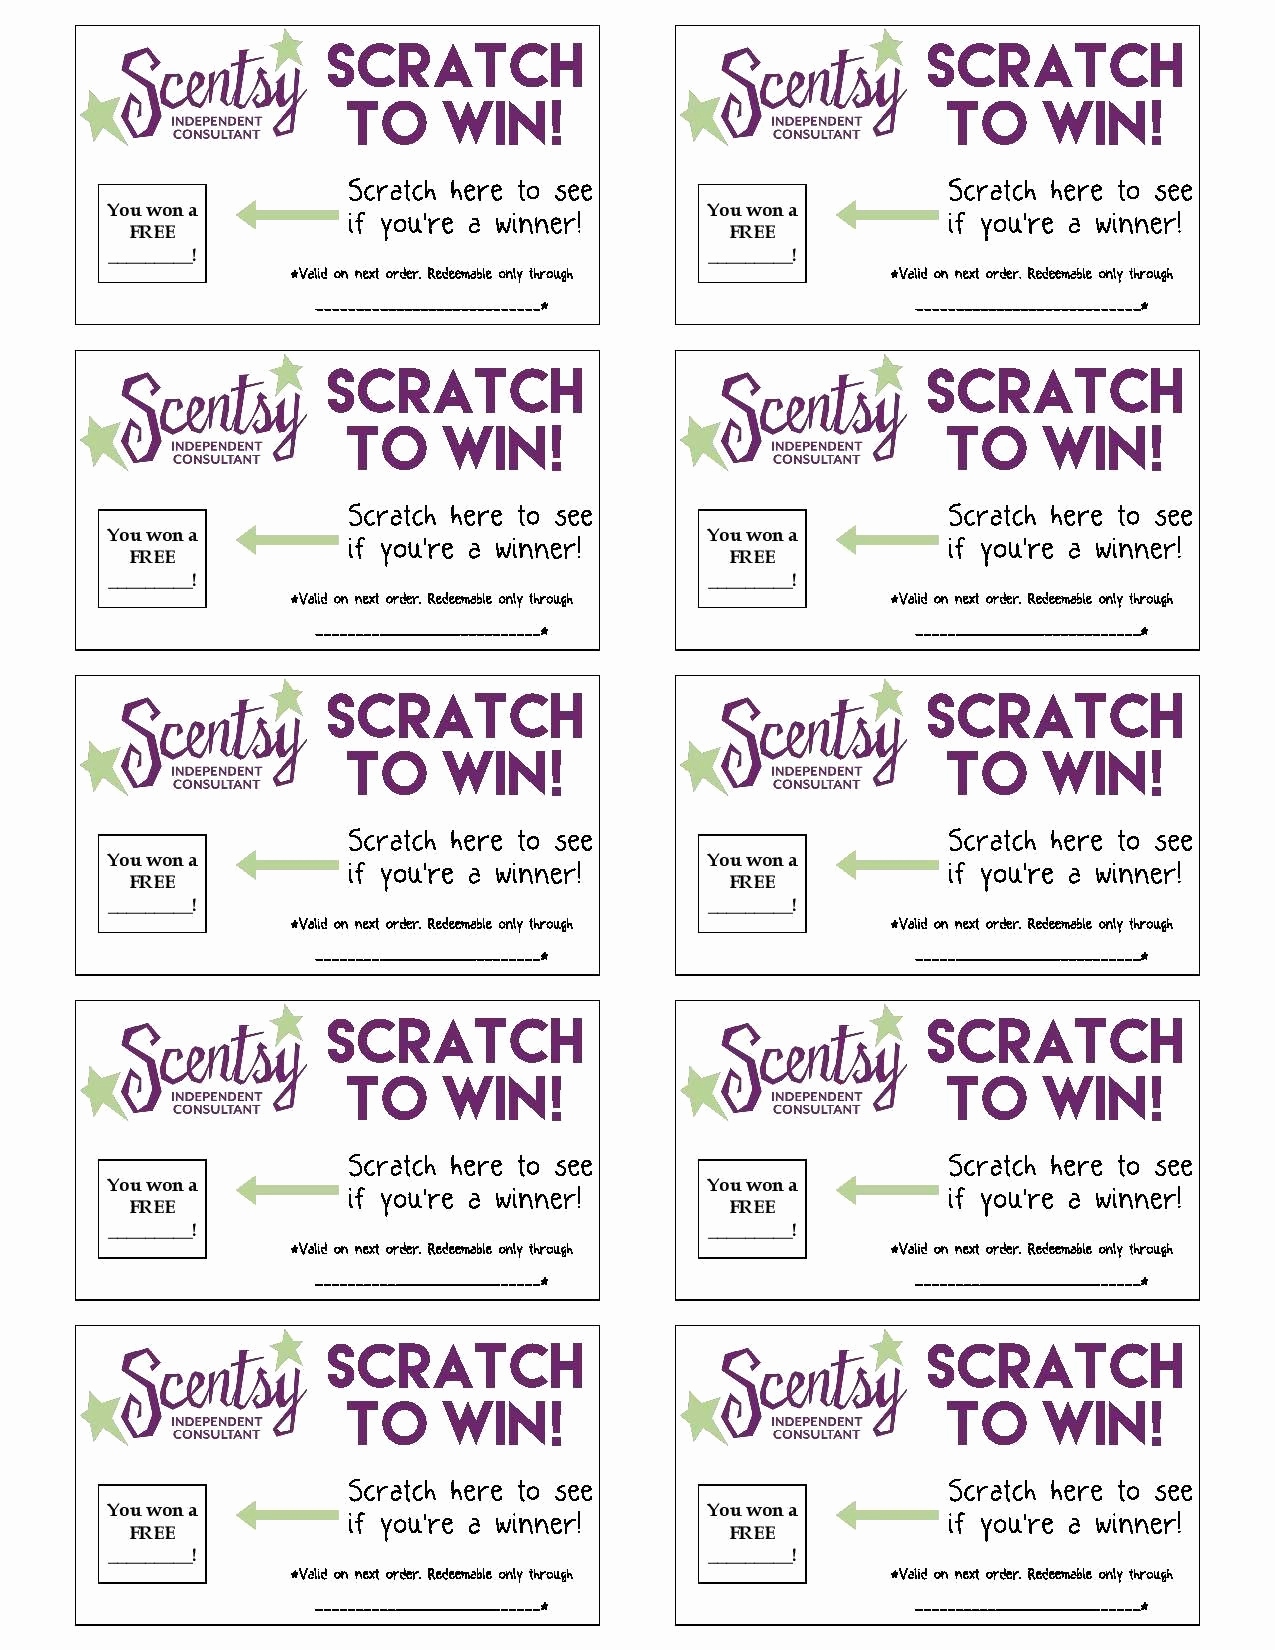 Scentsy Party Invitation Template Best Of Create Scratch and Win Cards for Your Scentsy Business